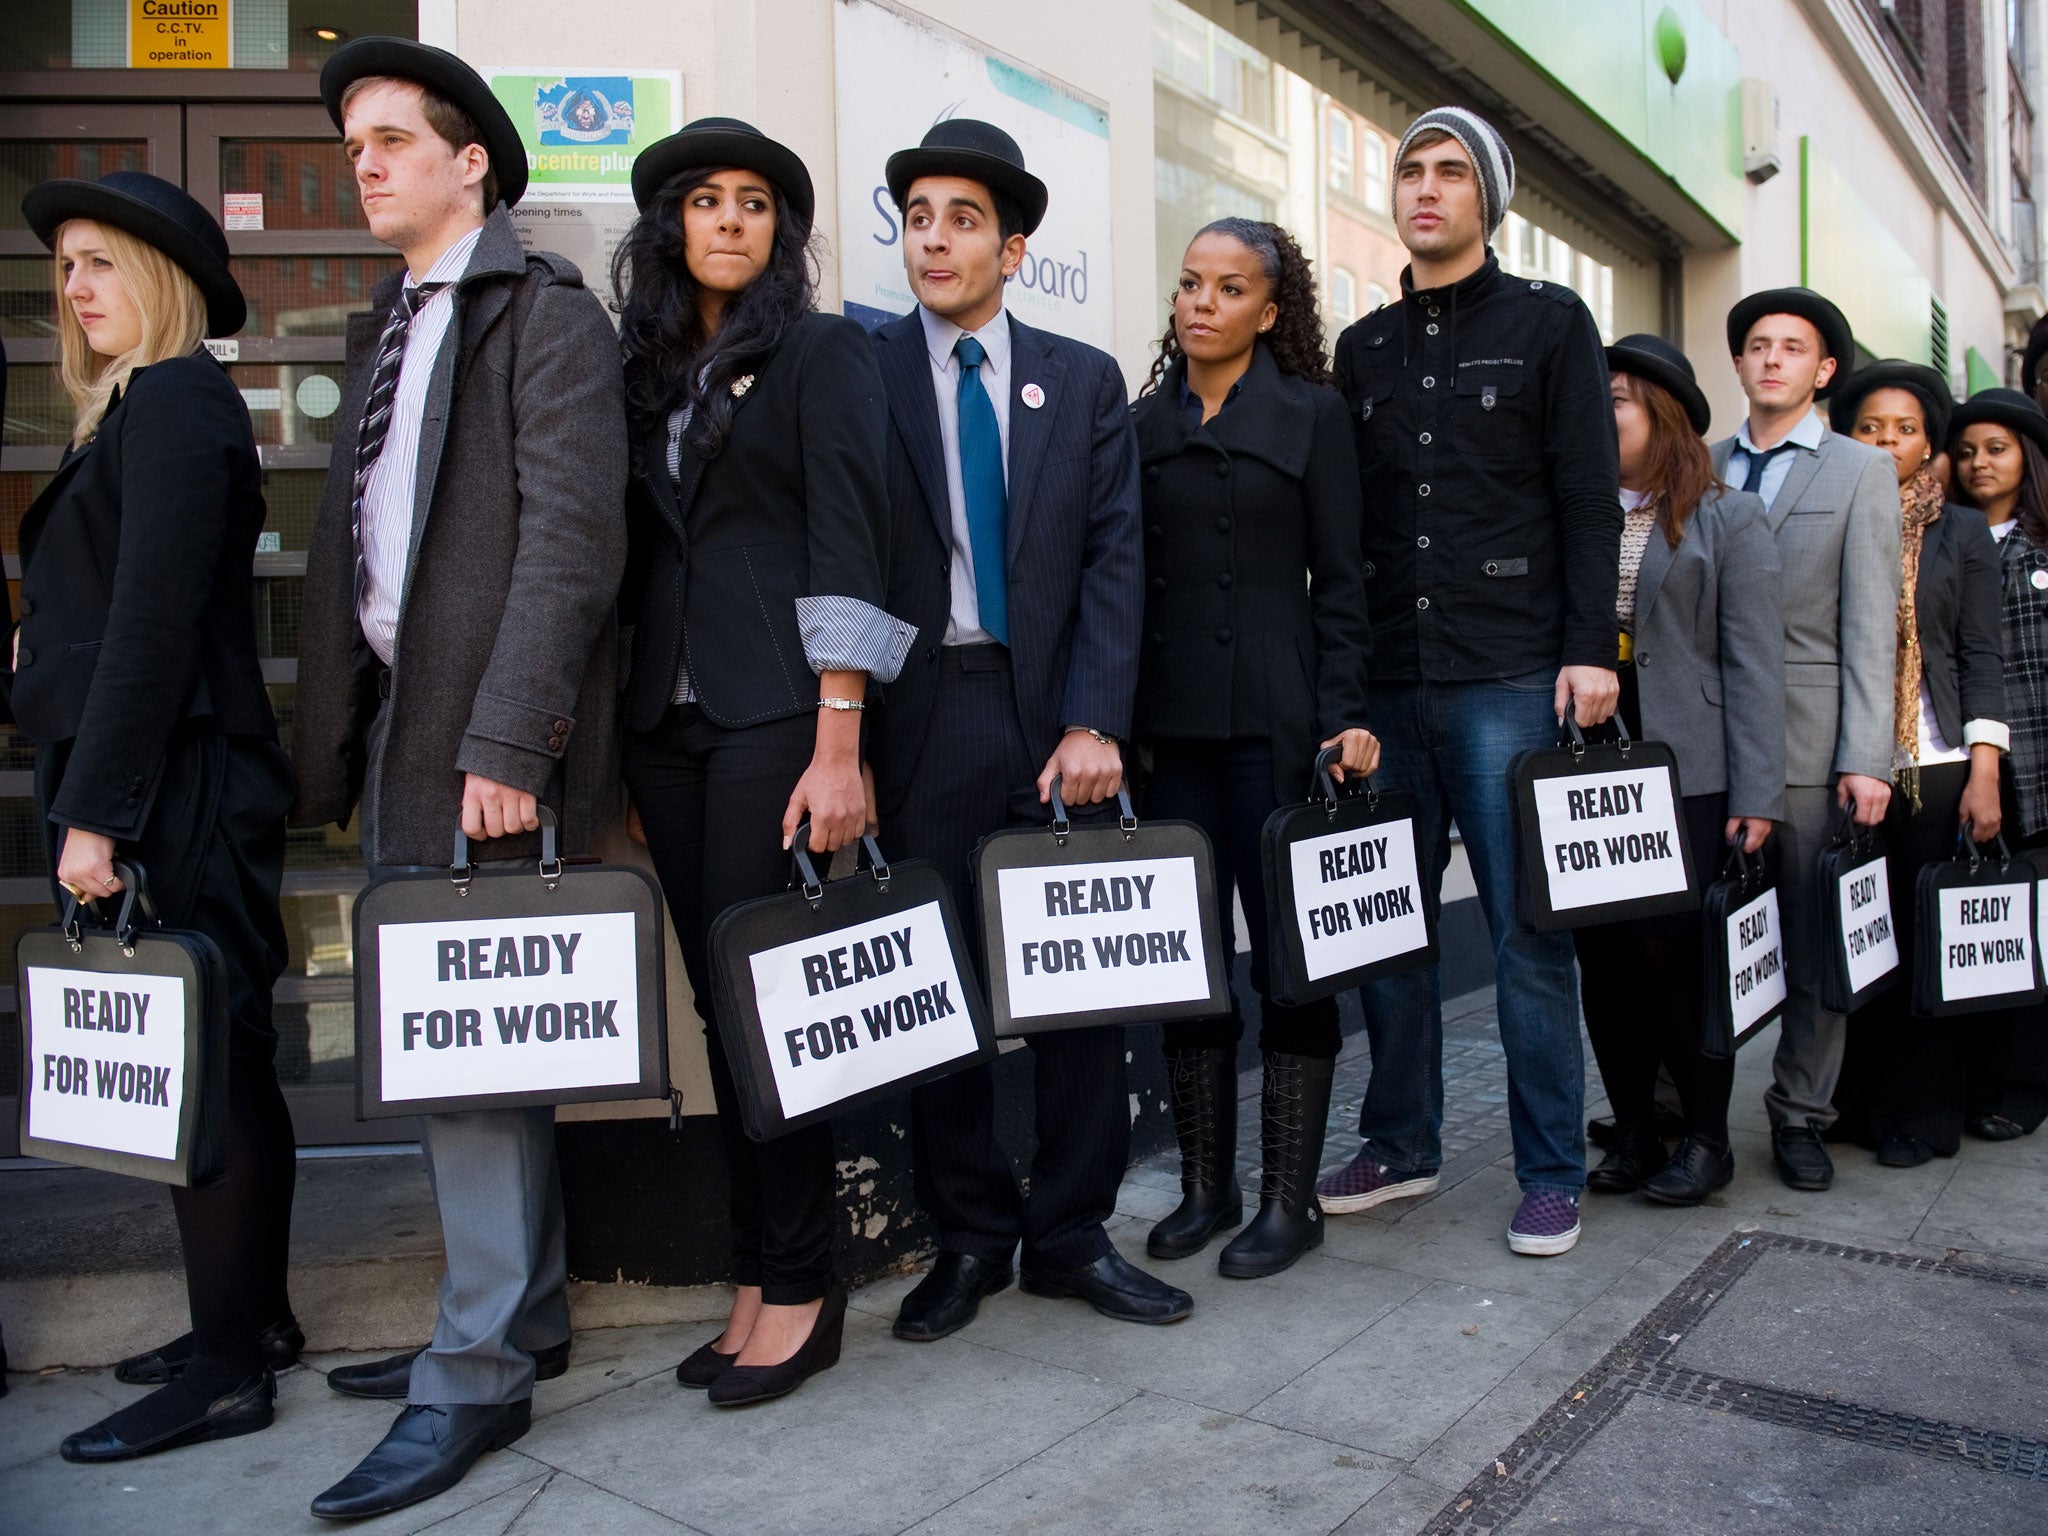 British musicians Miss Dynamite (5th L) and Charlie Simpson (6th L) join unemployed young people as they stand in line outside a job centre in central London during a photocall for the Battlefront Campaign